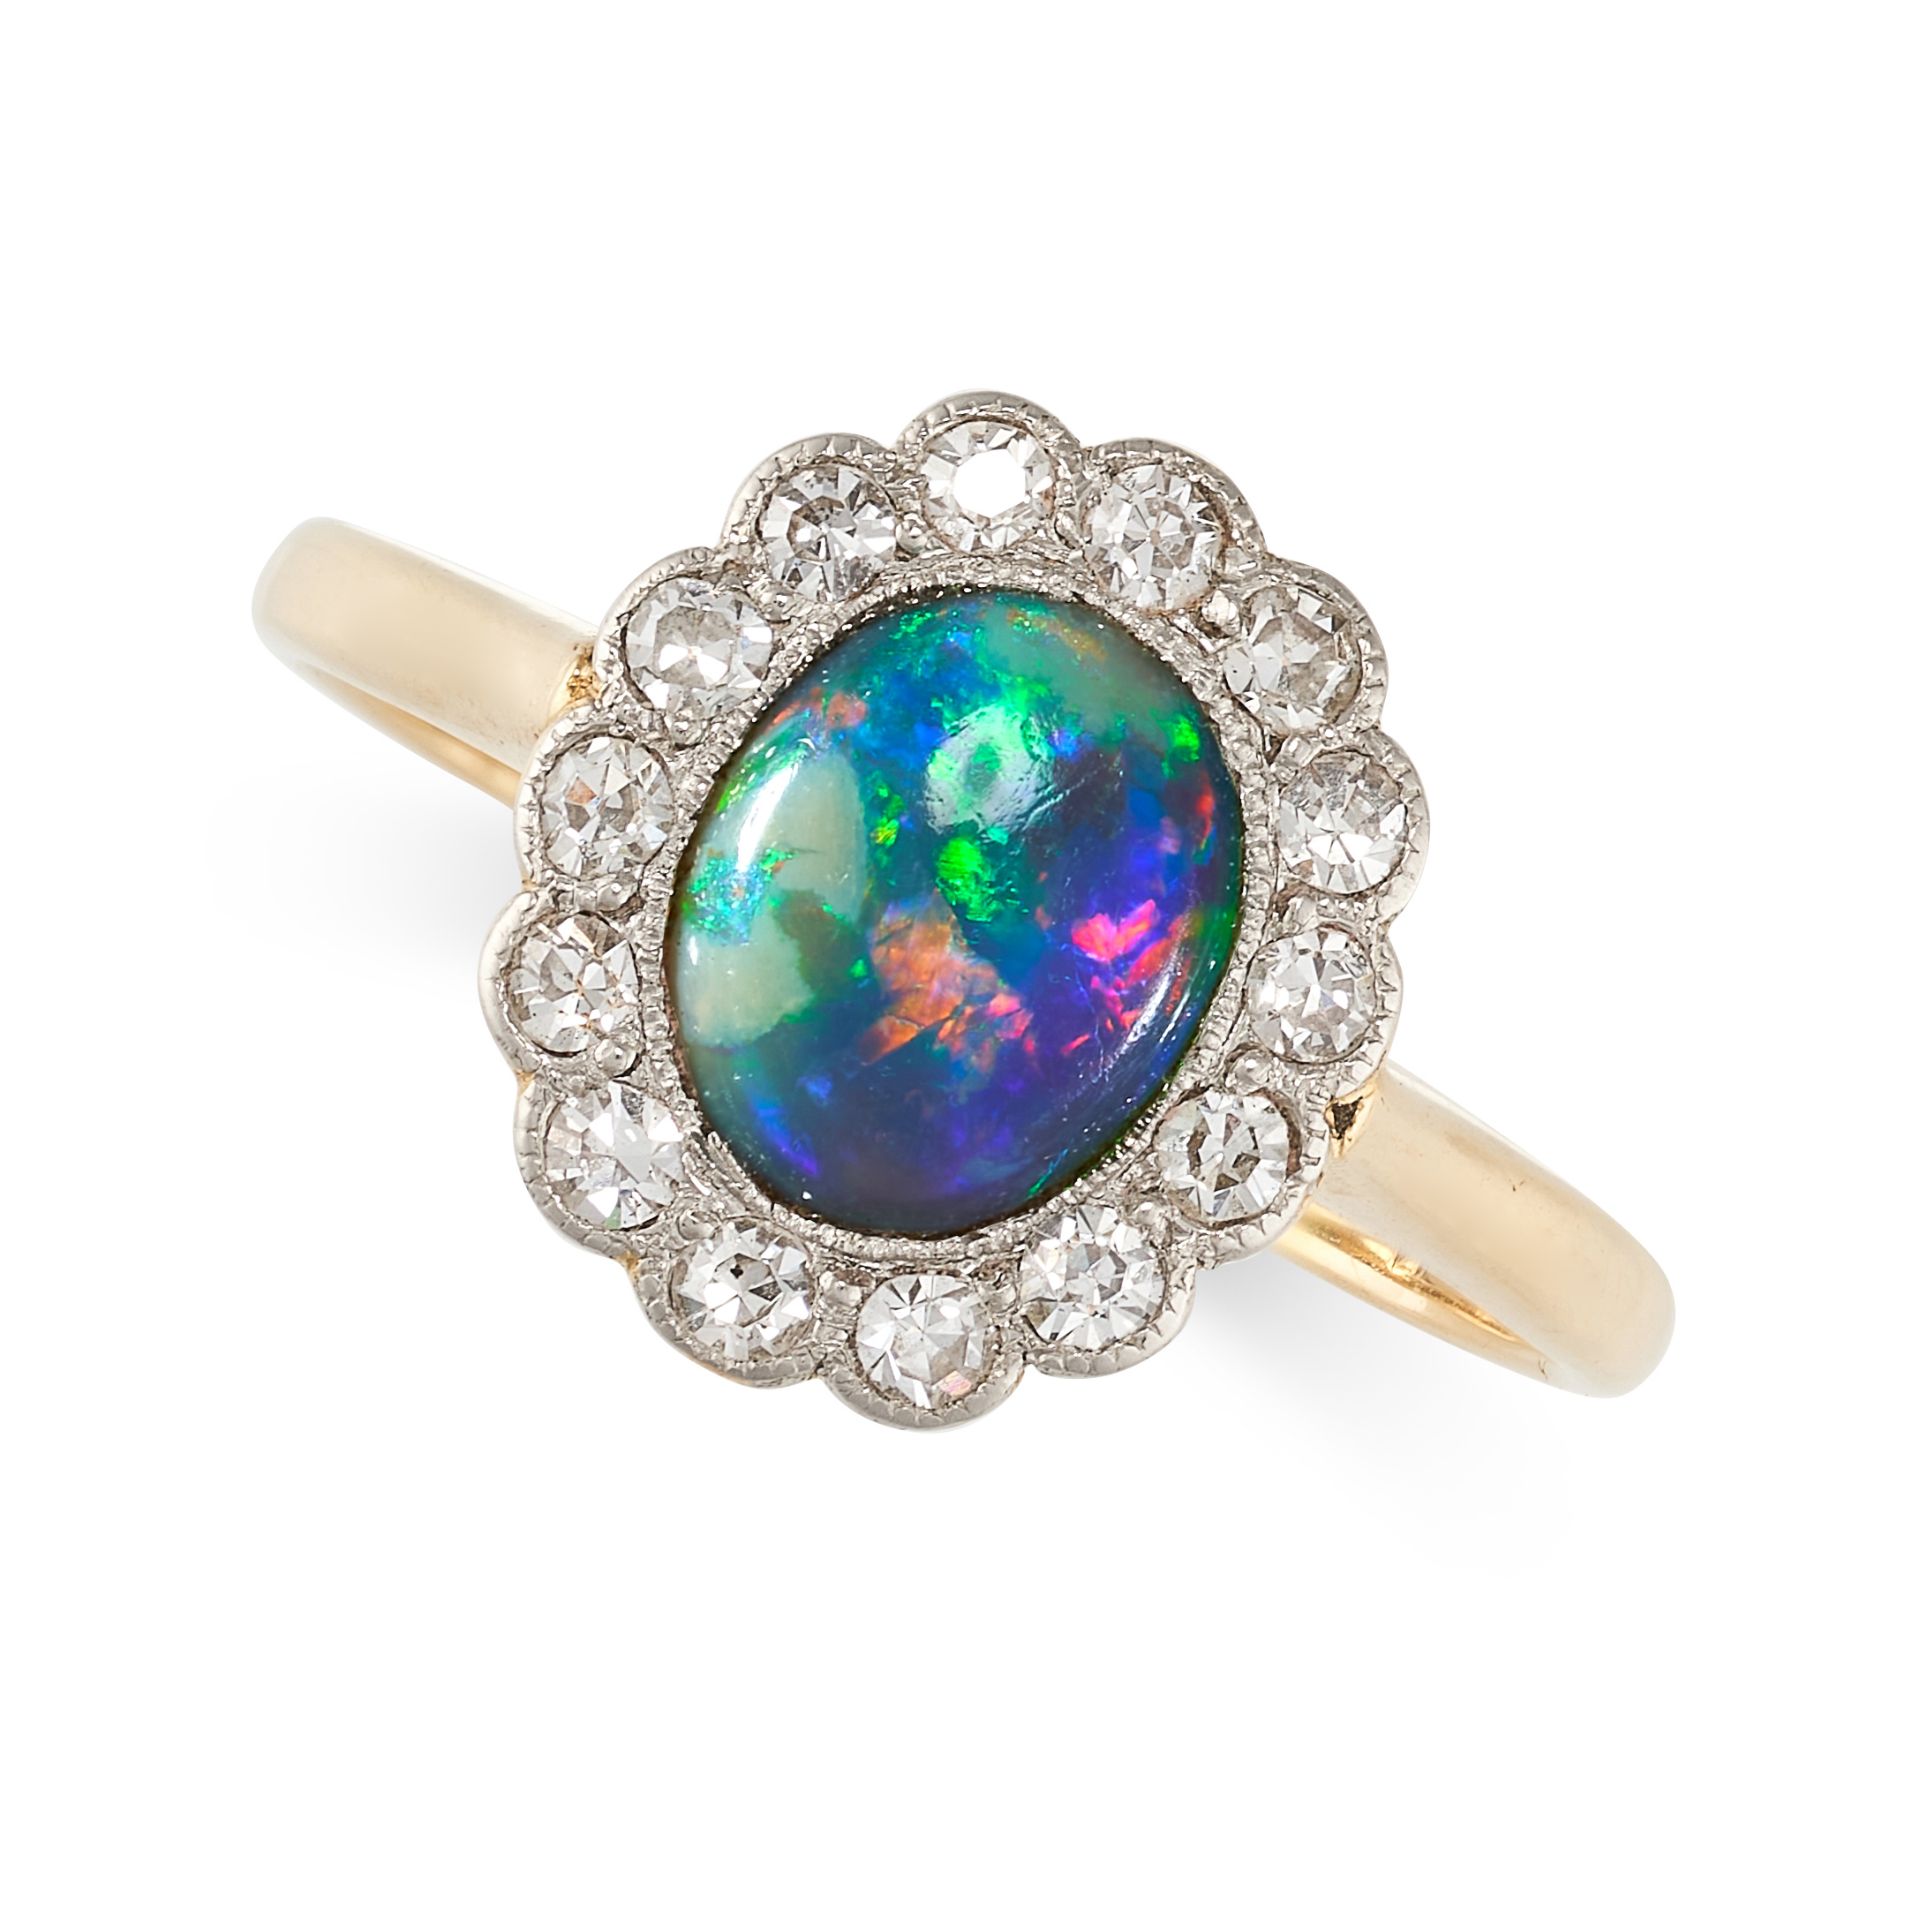 NO RESERVE - AN ANTIQUE BLACK OPAL AND DIAMOND CLUSTER RING in 18ct yellow gold and platinum, set